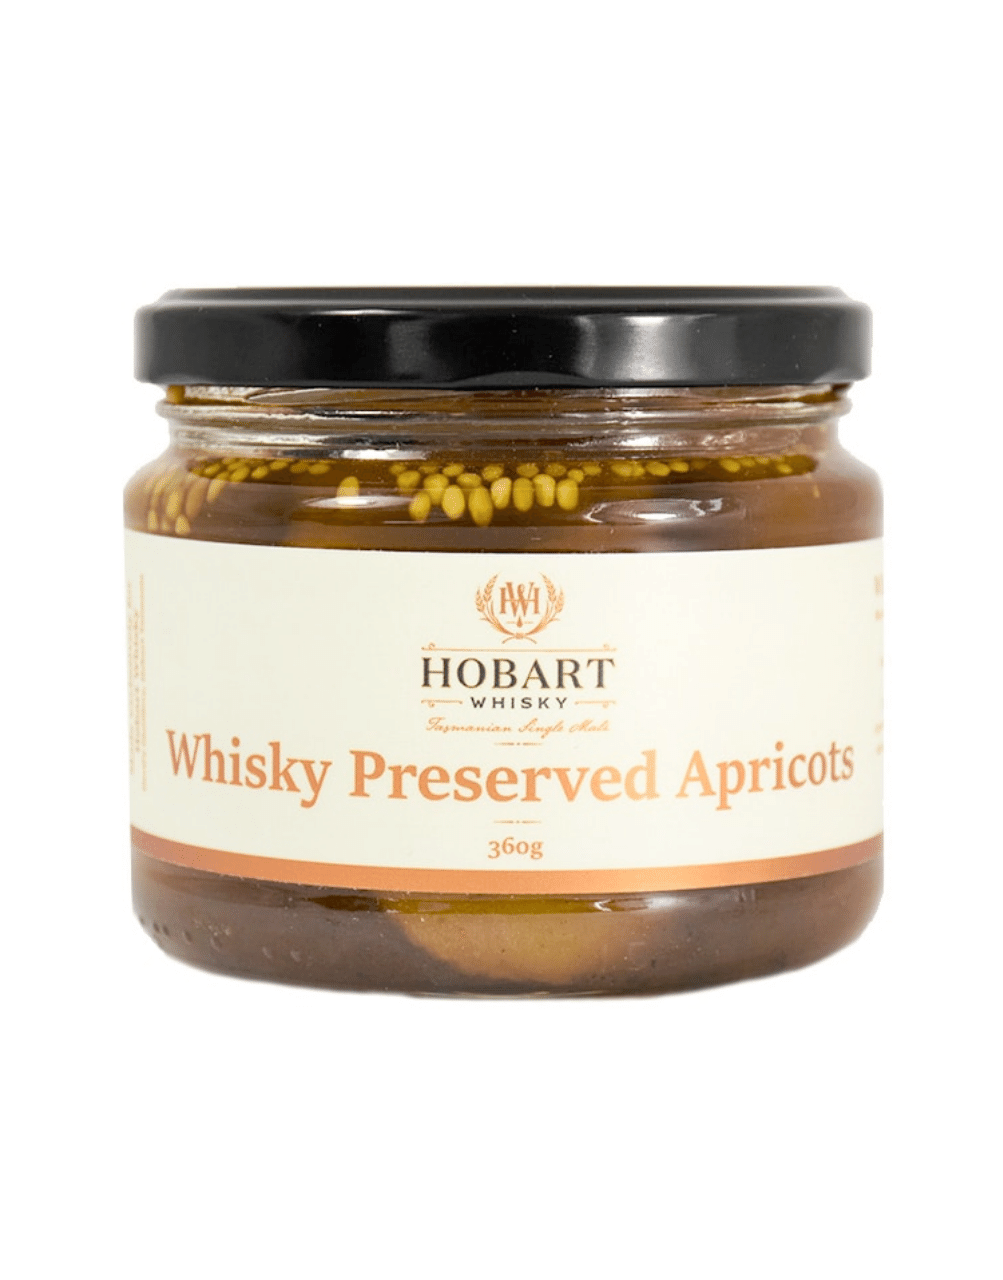 Hobart Whisky Preserved Apricots 360g